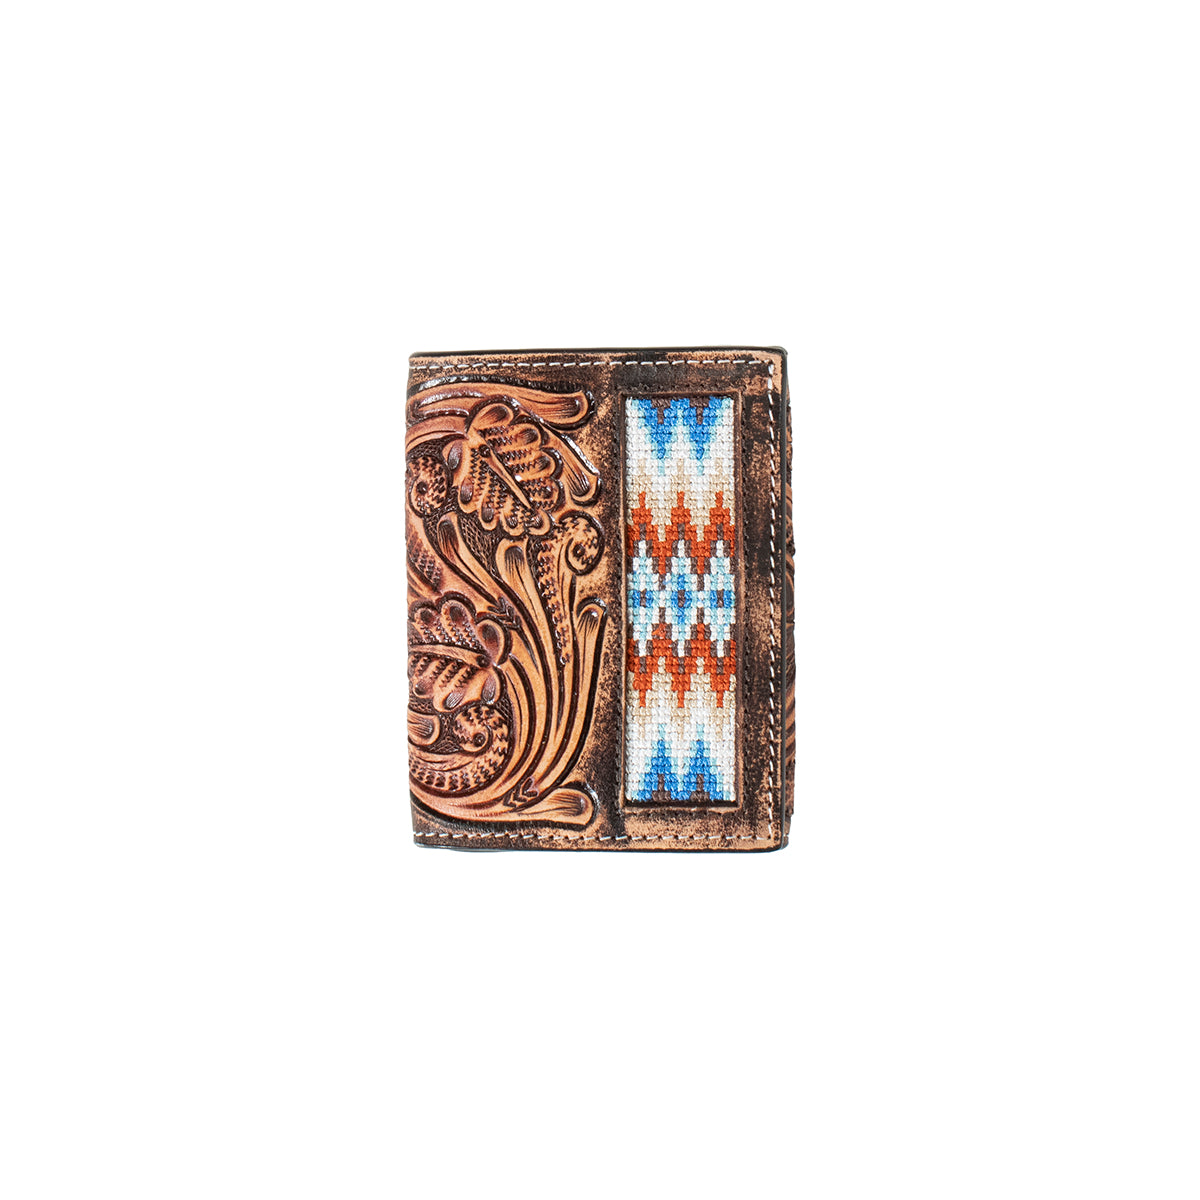 MENS 3D TRIFOLD TOOLED SCROLL W/ EMBROIDERED INLAY WALLET